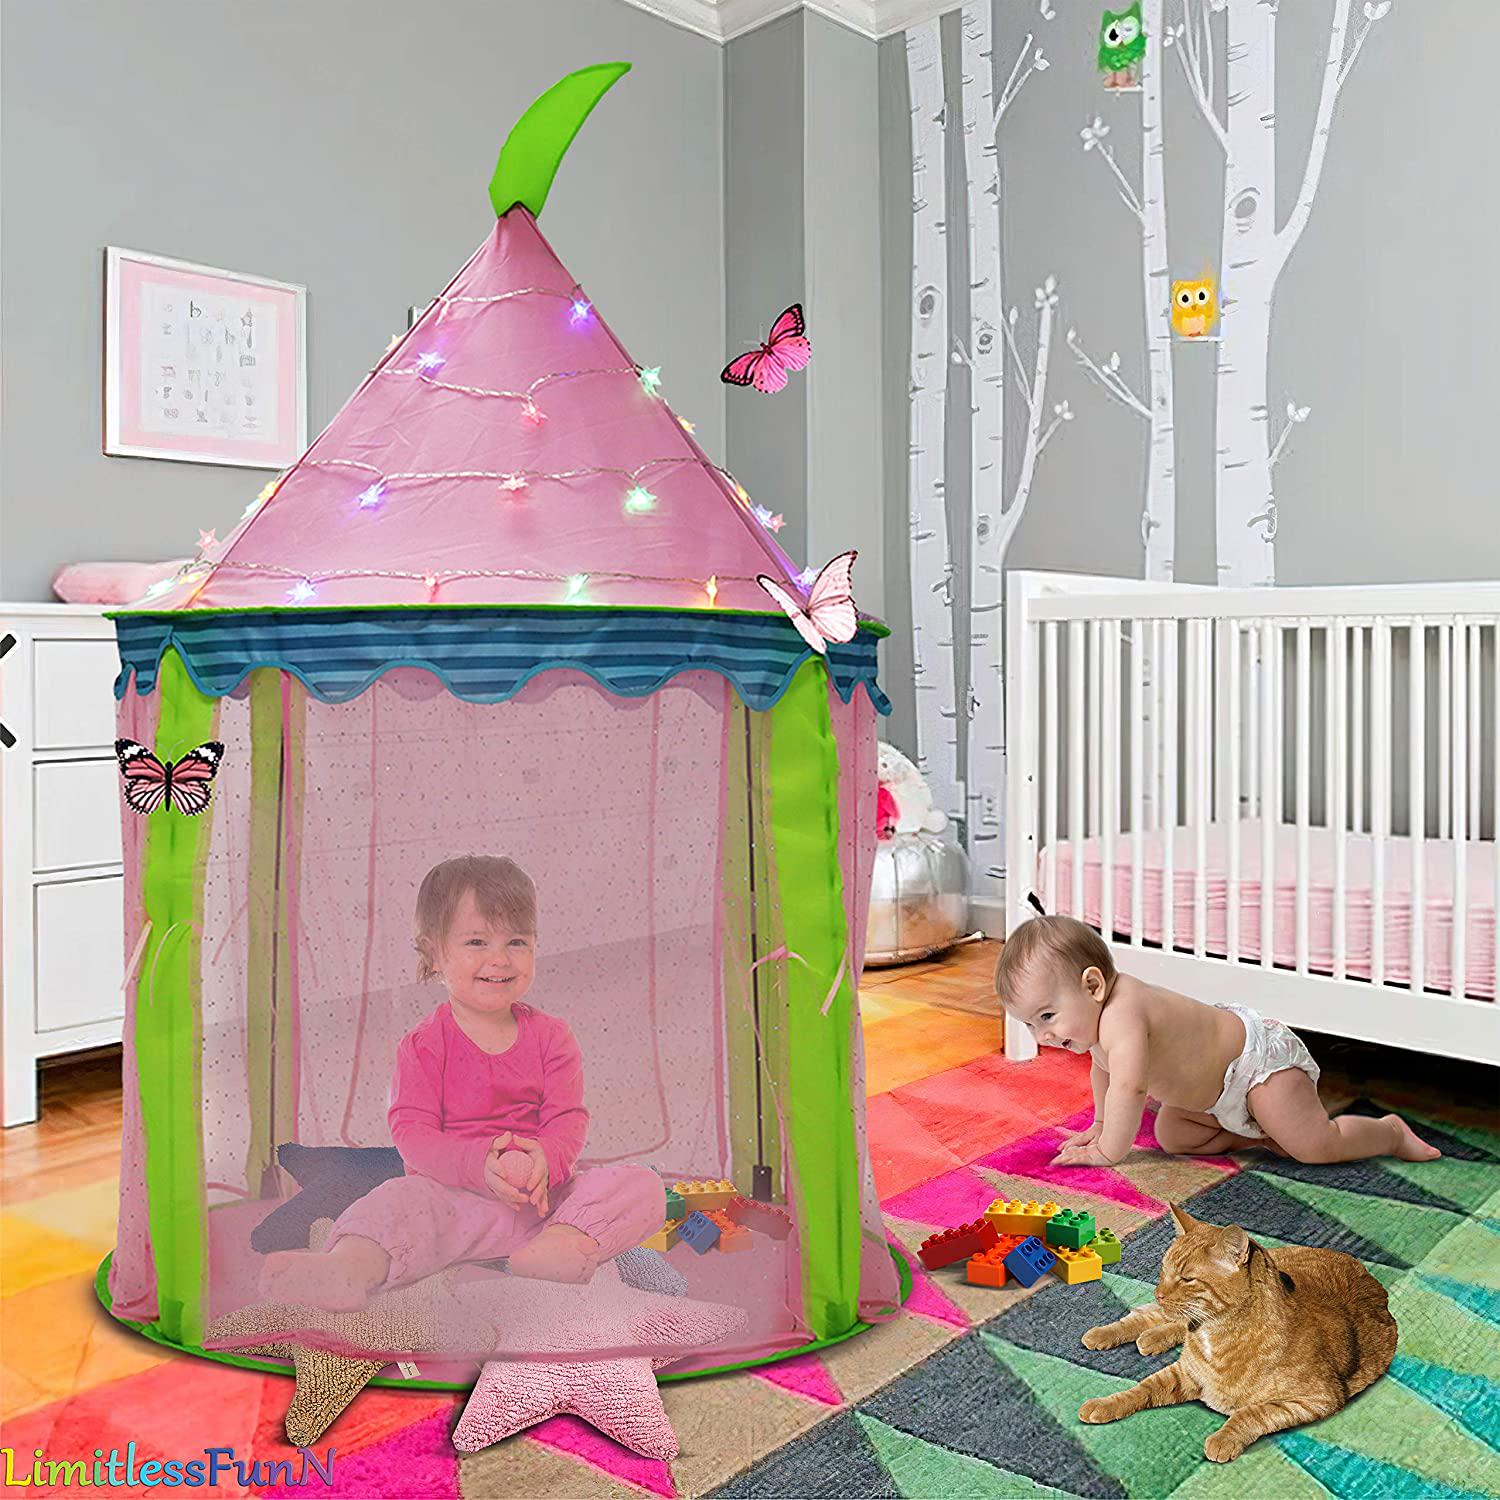 LimitlessFunN, LimitlessFunN Princess Castle Tent with Star Lights 41 X 55 Girls Playhouse Kids Play Tent for Children, Indoor and Outdoor, Pink